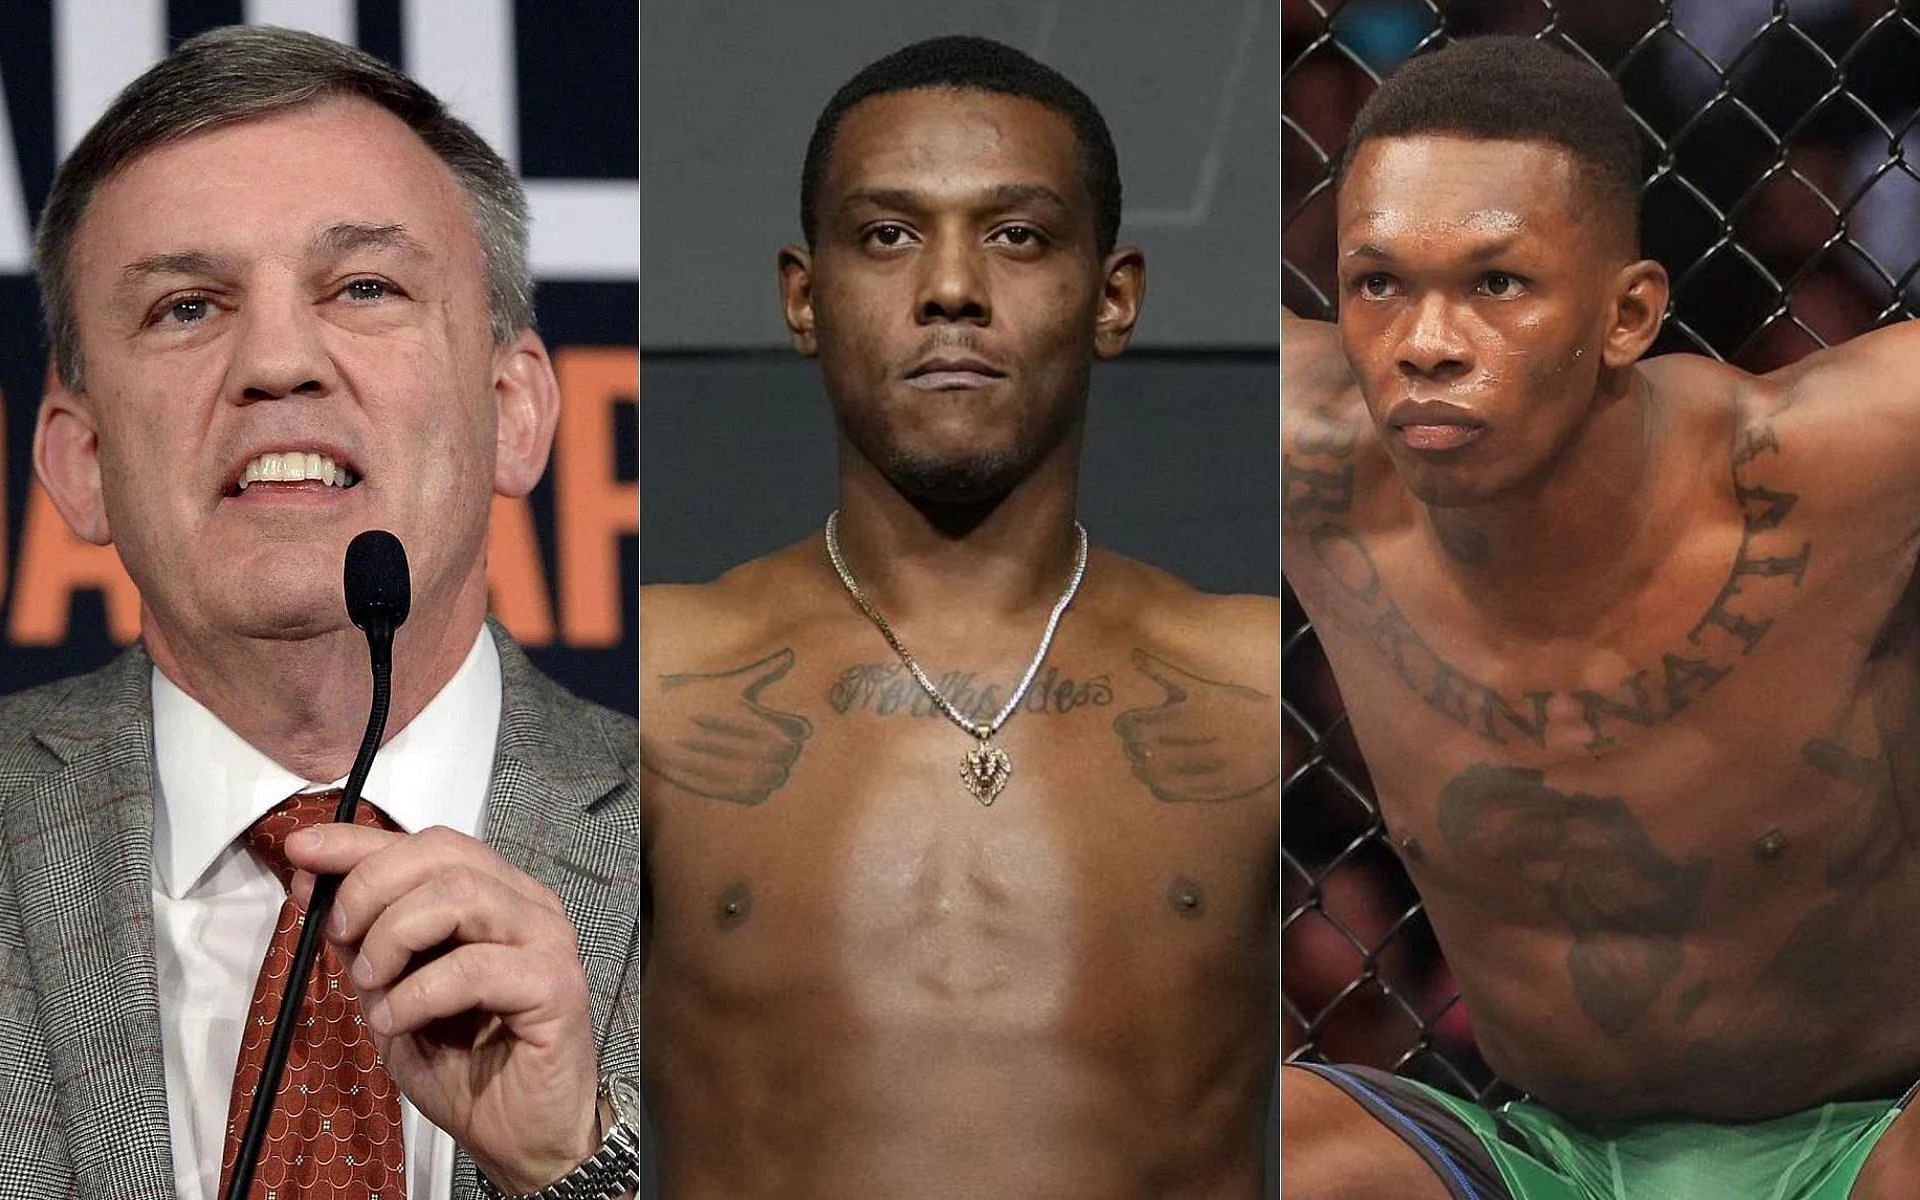 Teddy Atlas (left), Jamahal Hill (middle) and Israel Adesanya (right)